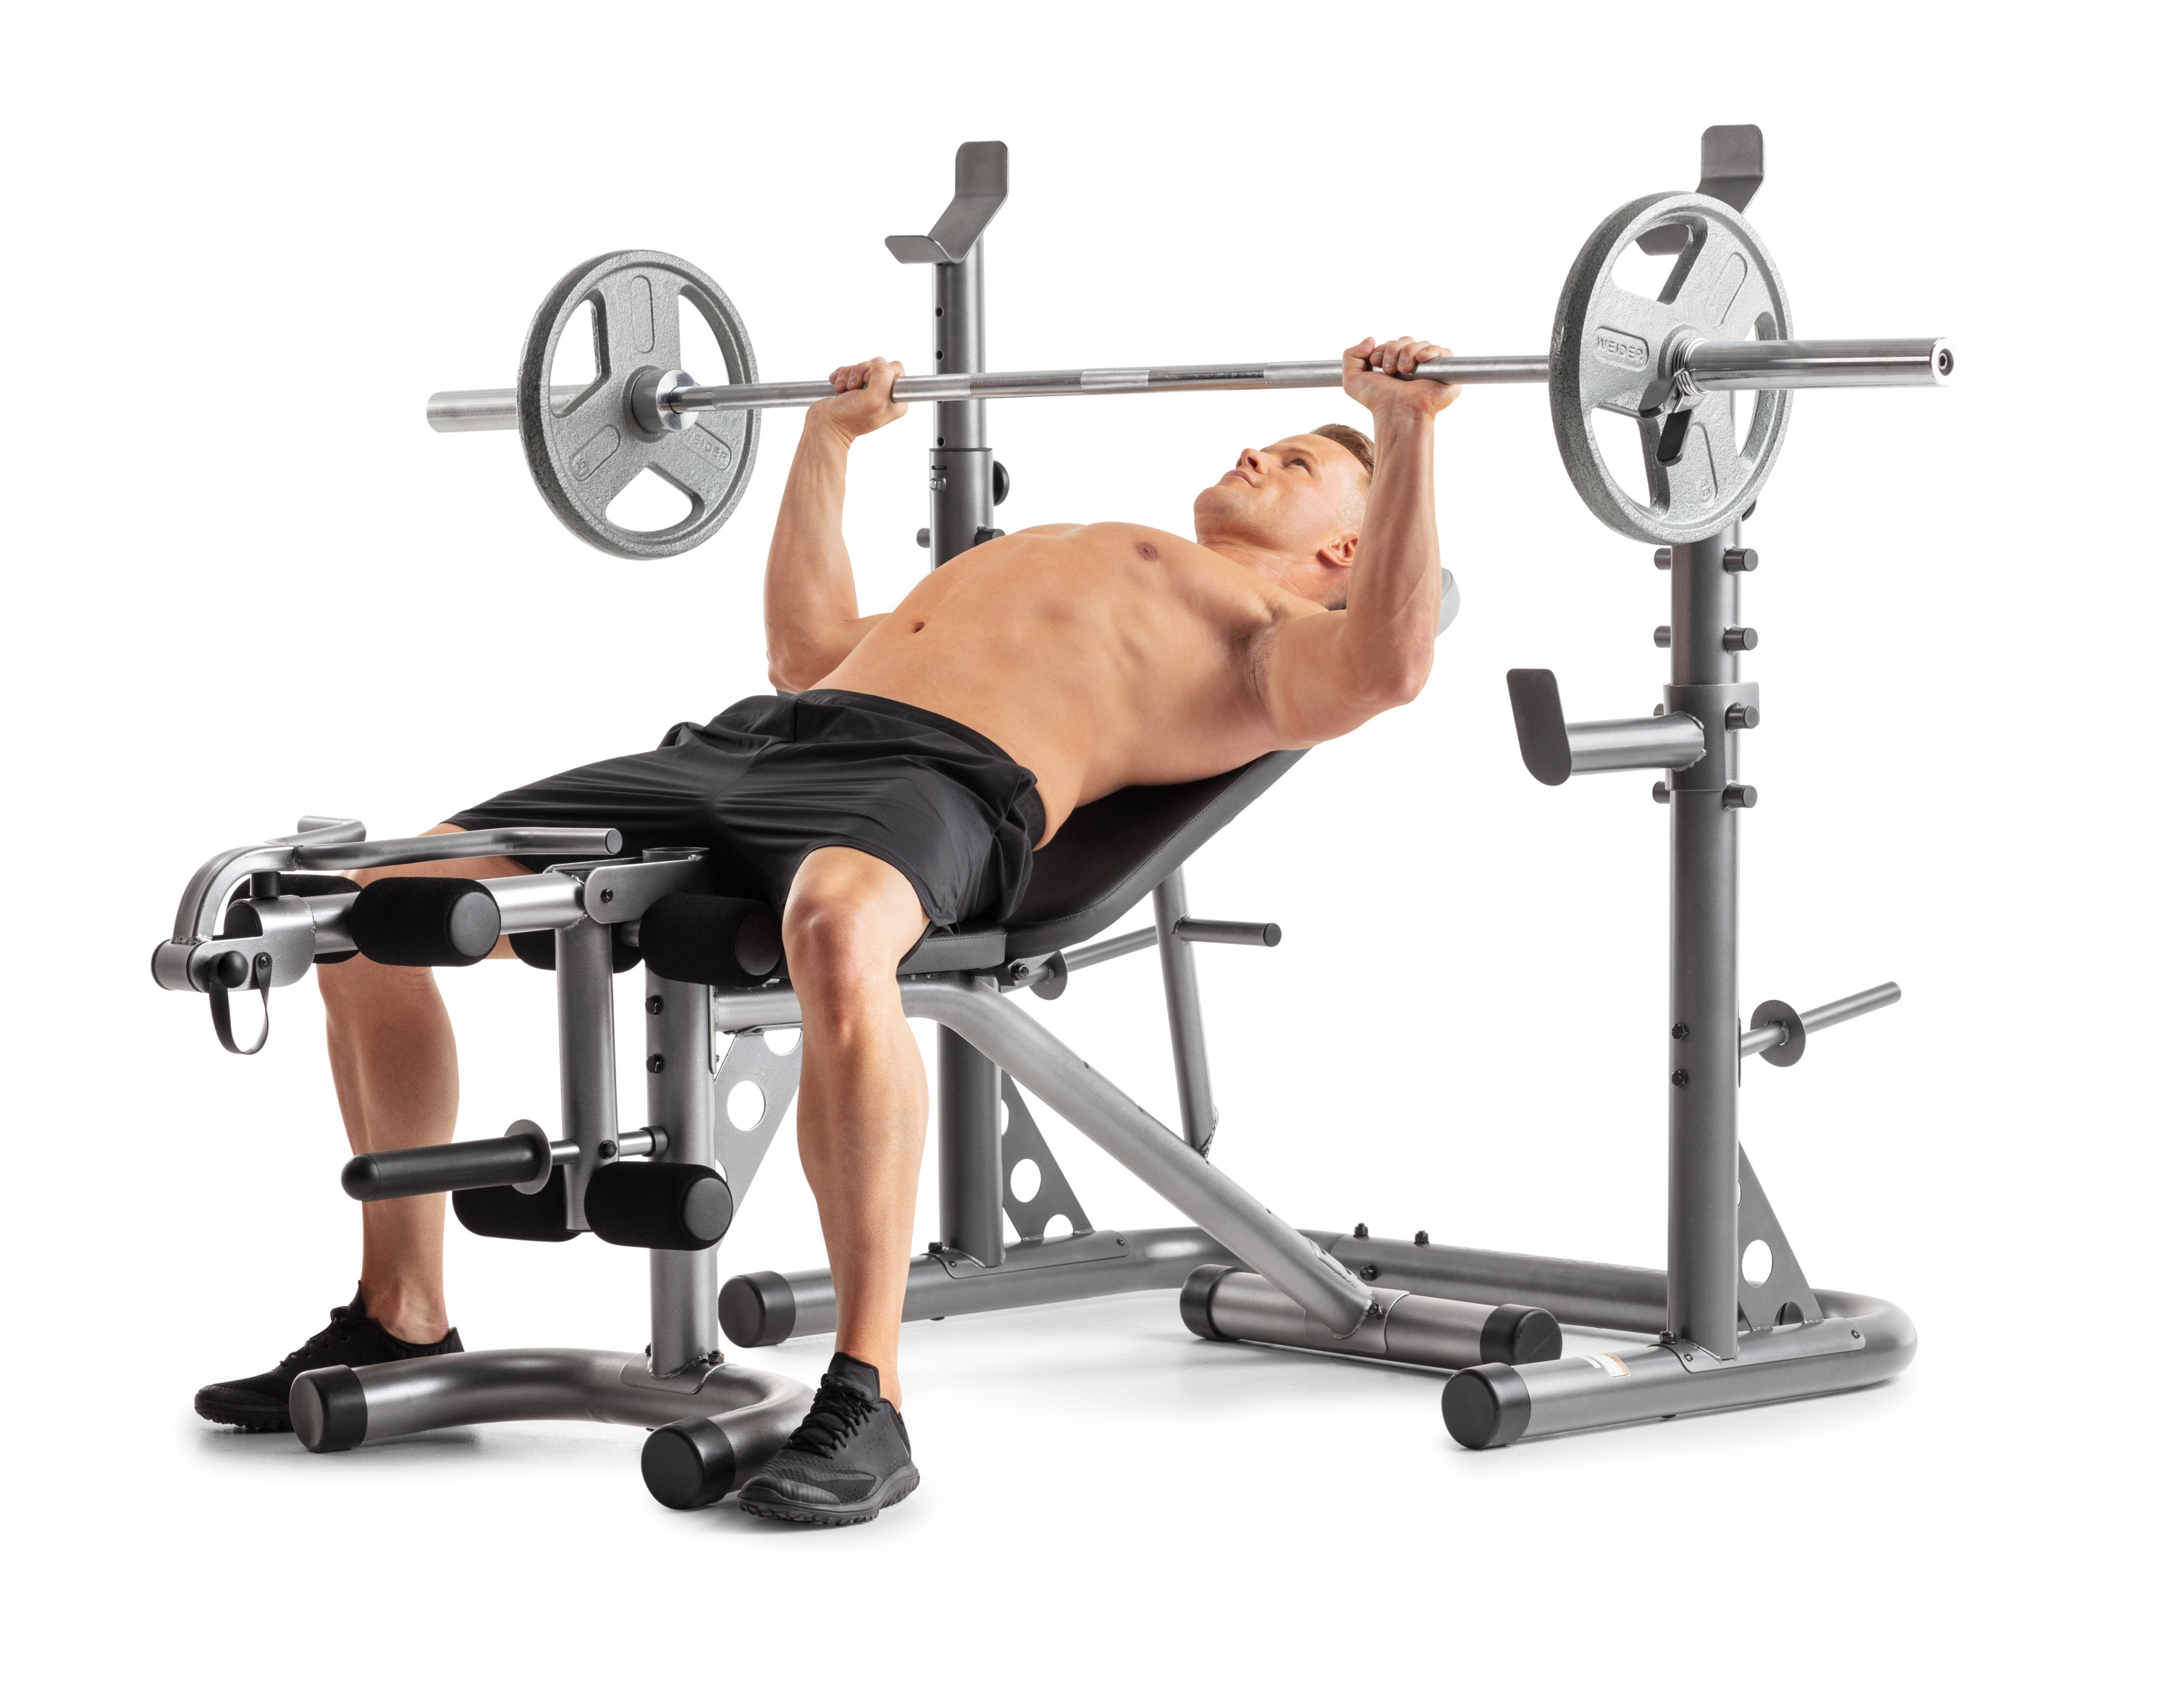 Weider XRS 20 Adjustable Bench with Olympic Squat Rack and Preacher Pad, 610 lb. Weight Limit - image 11 of 13